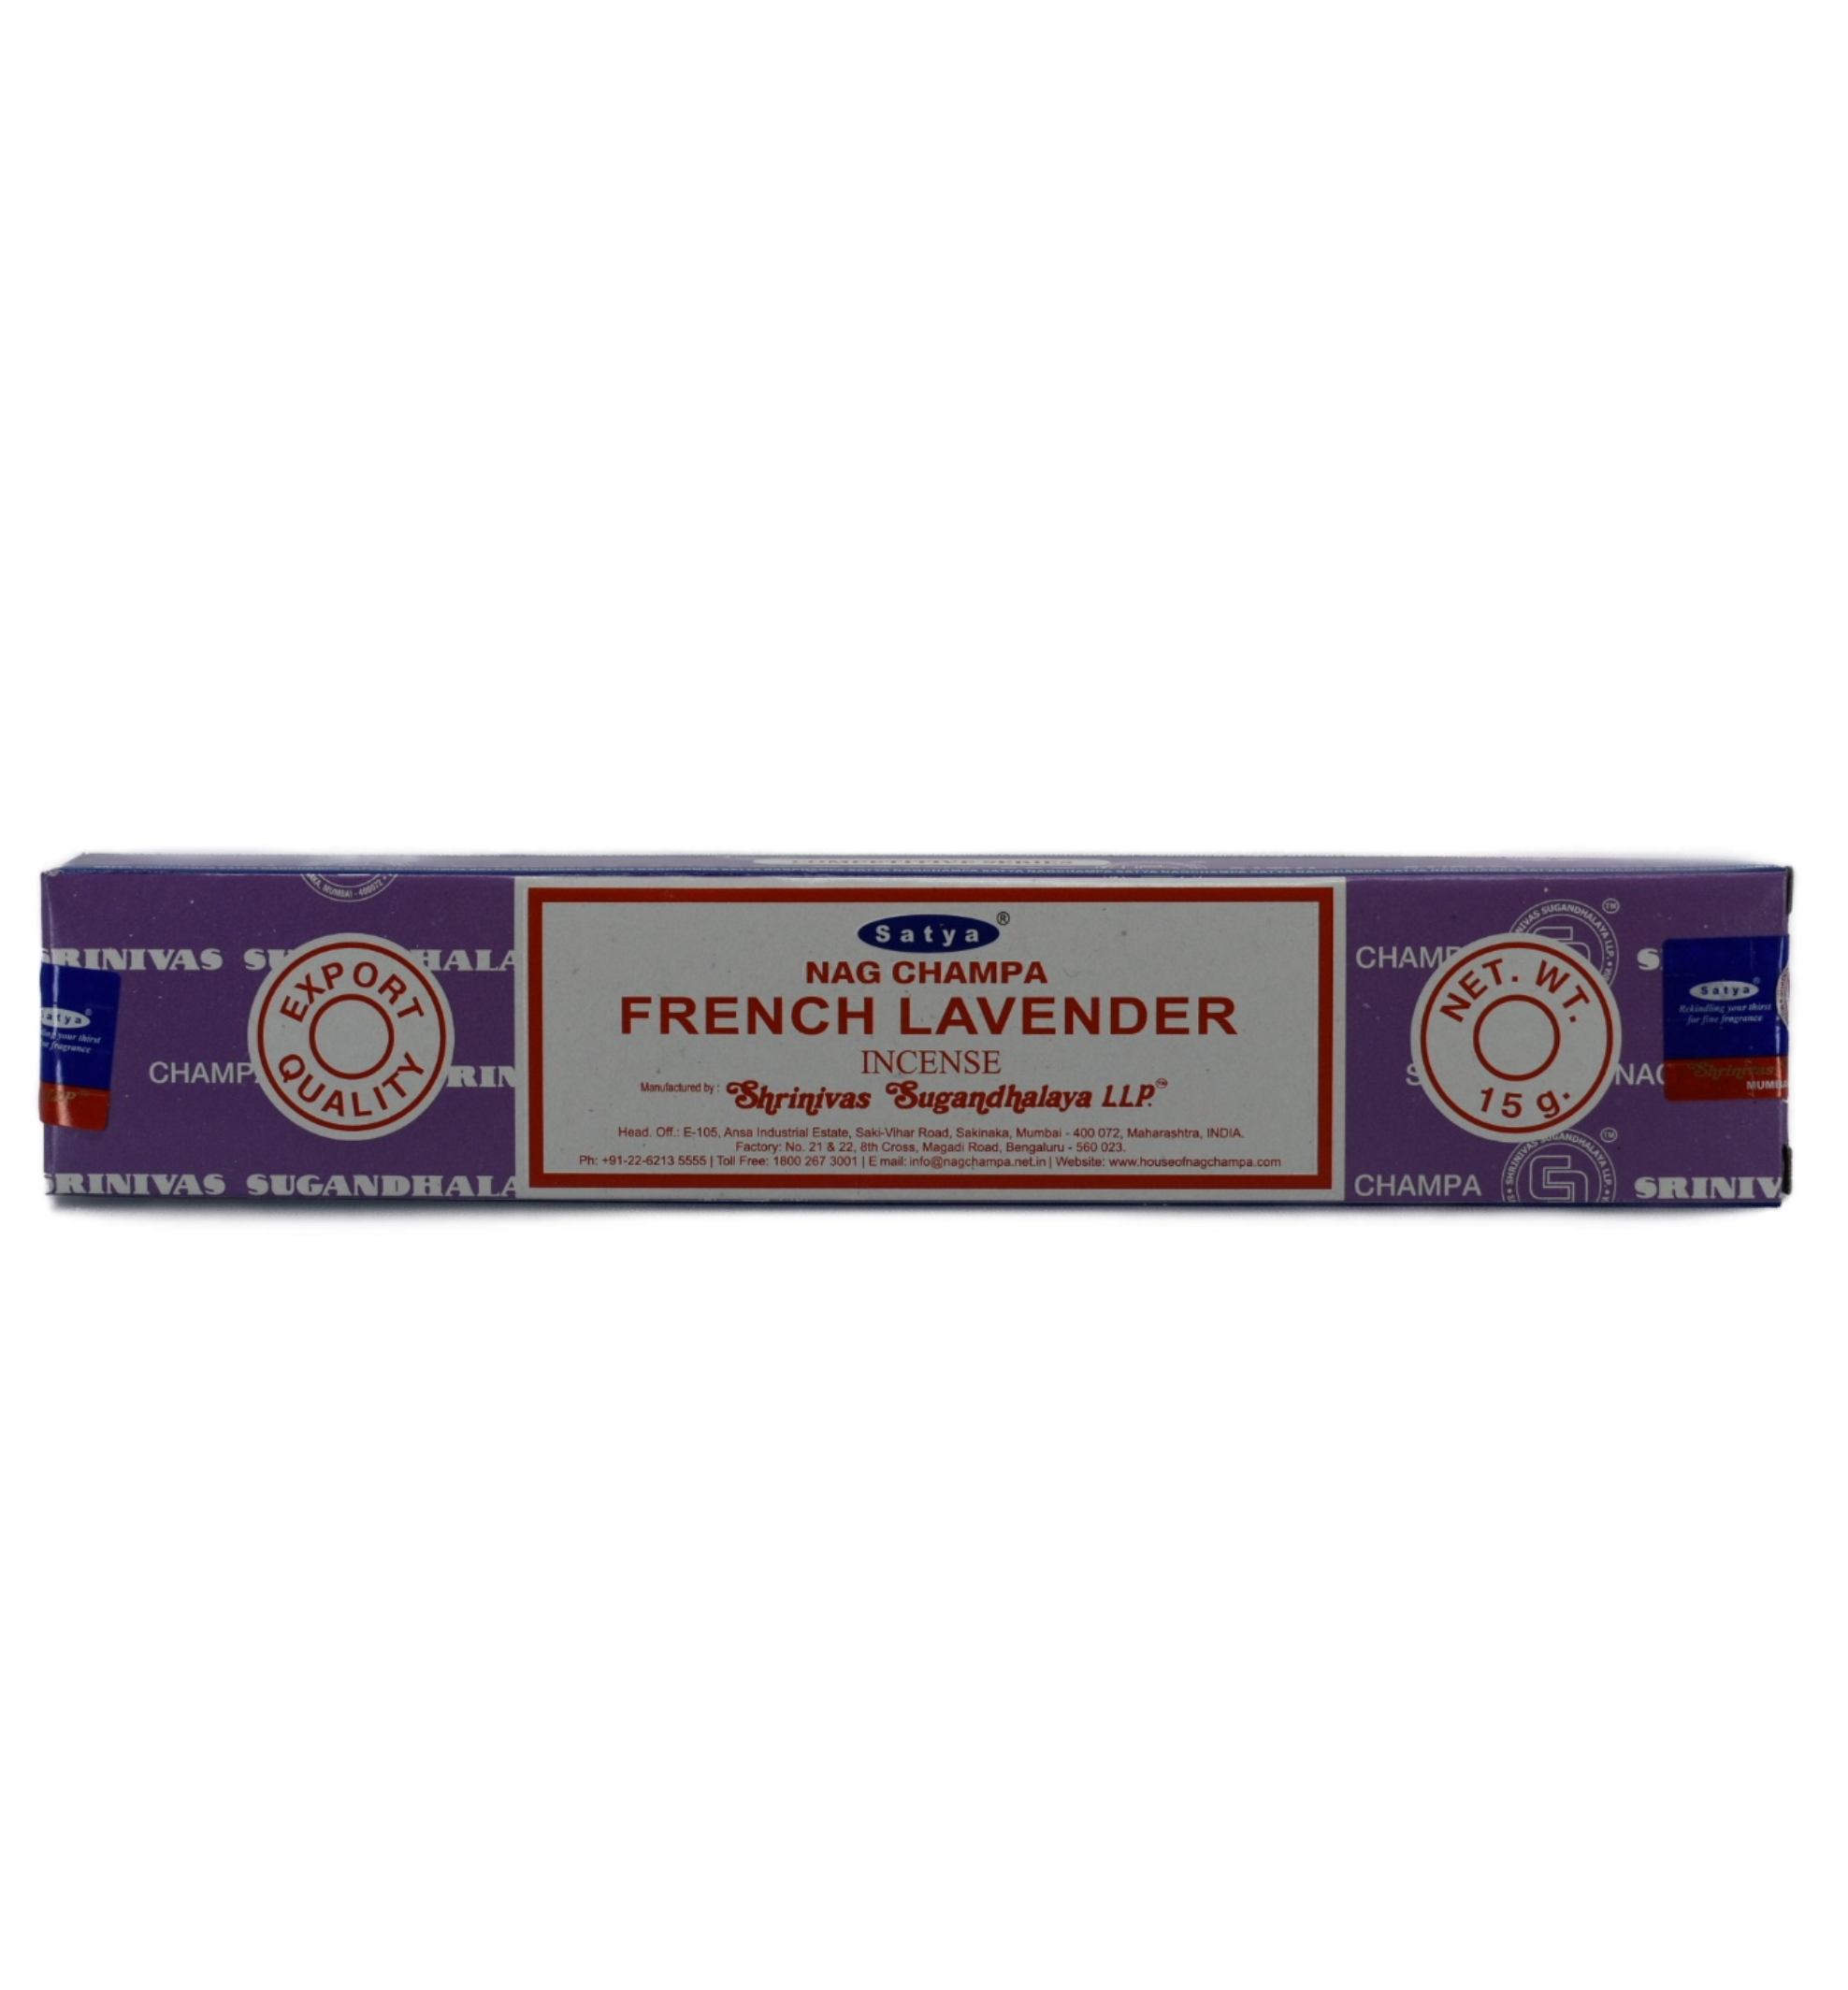 French Lavender Incense Sticks. The box is lavender with a design of stripes made of company words. The rectangler white box in the center has a red frame within the border. Inside the box it says Sayta, Nag Champa, French Lavender Incense. Below that is the manufacturer's information. On both sides of the rectangle are circles. The left circle says export quality and the right circle says NET. WT. 15 g.